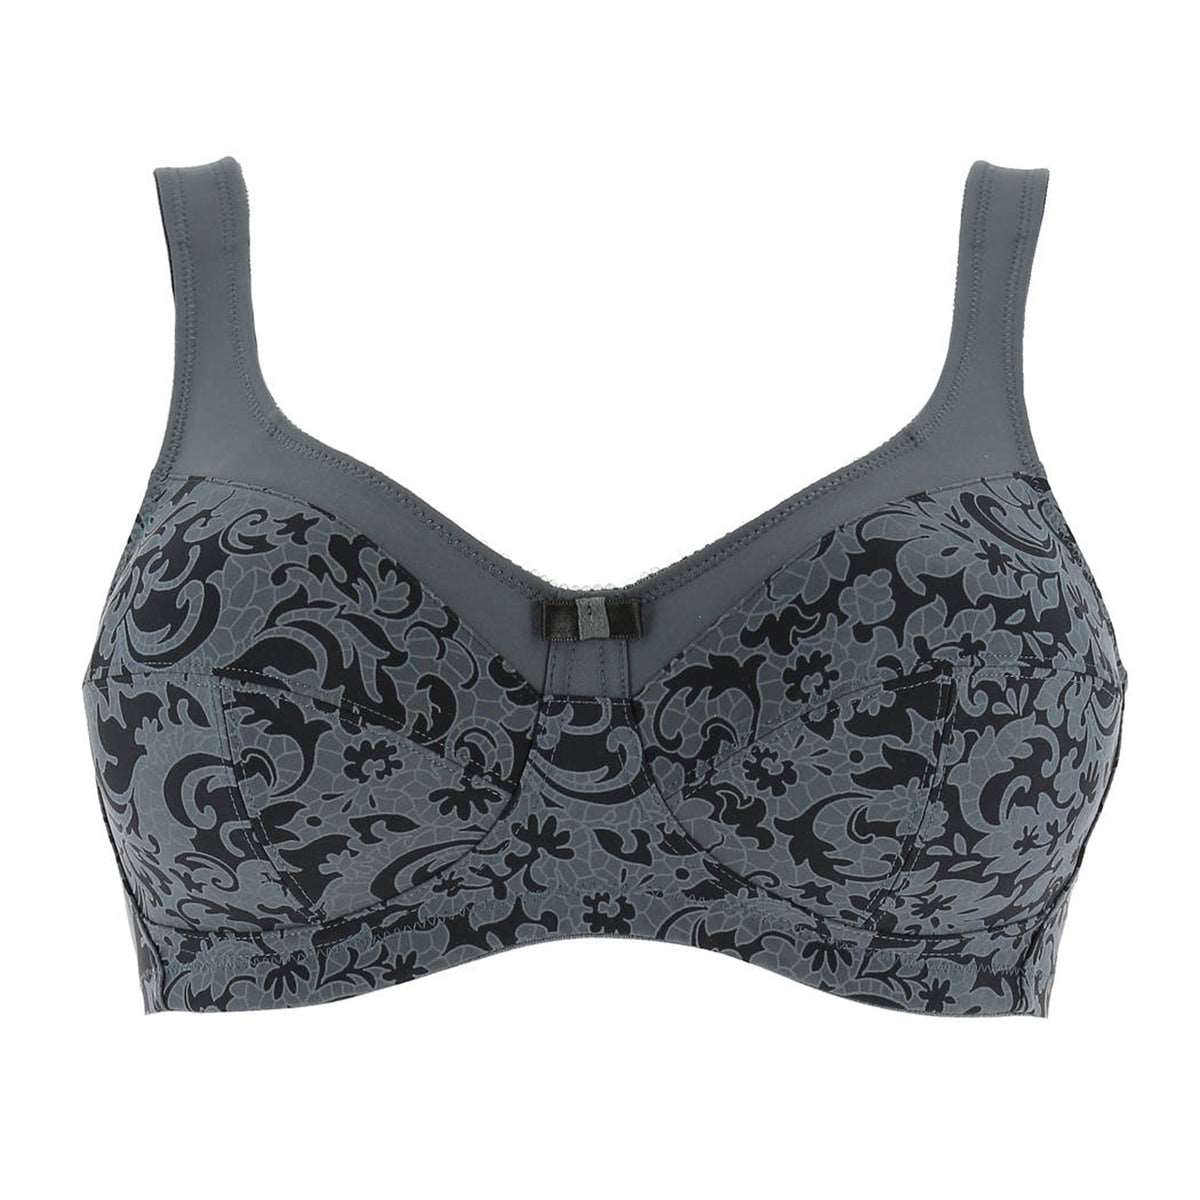 Black Skin Pocket Lace Push Up Bra For Women Ideal For Mastectomy